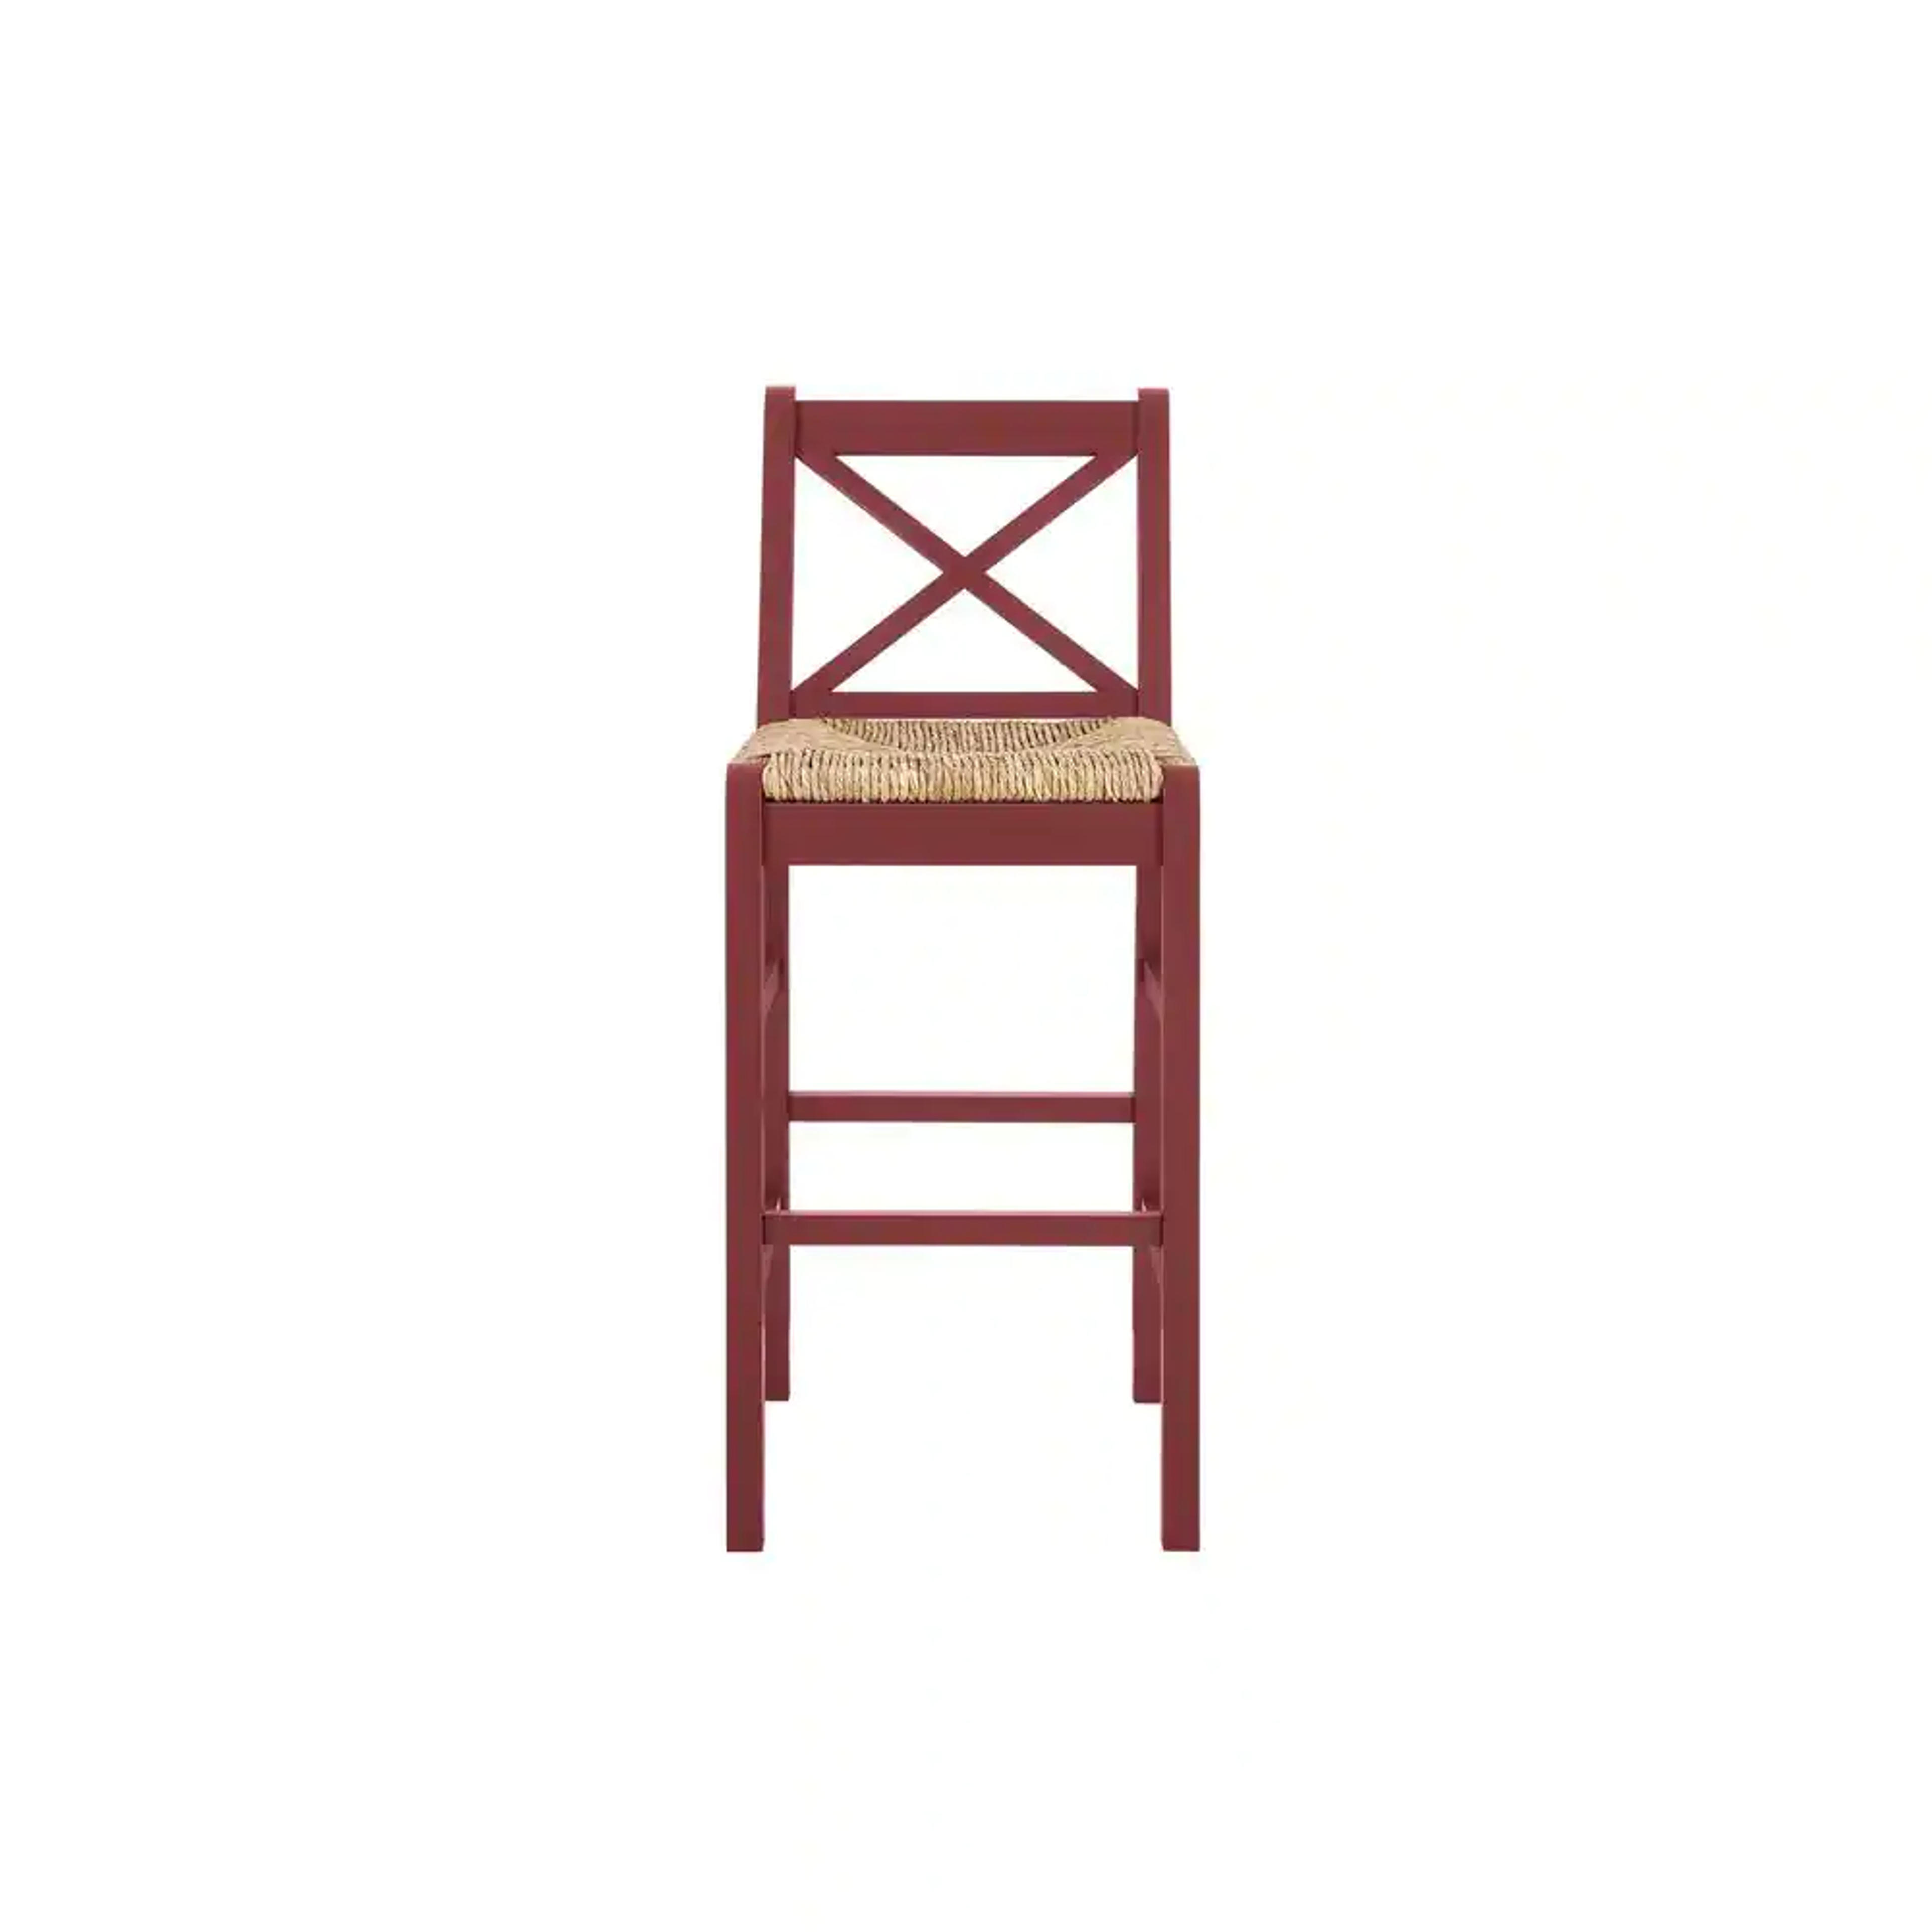 Home Decorators Collection Dorsey Mason Red Wood Bar Stool with Back and Woven Rush Seat ST1808245-NMAS - The Home Depot